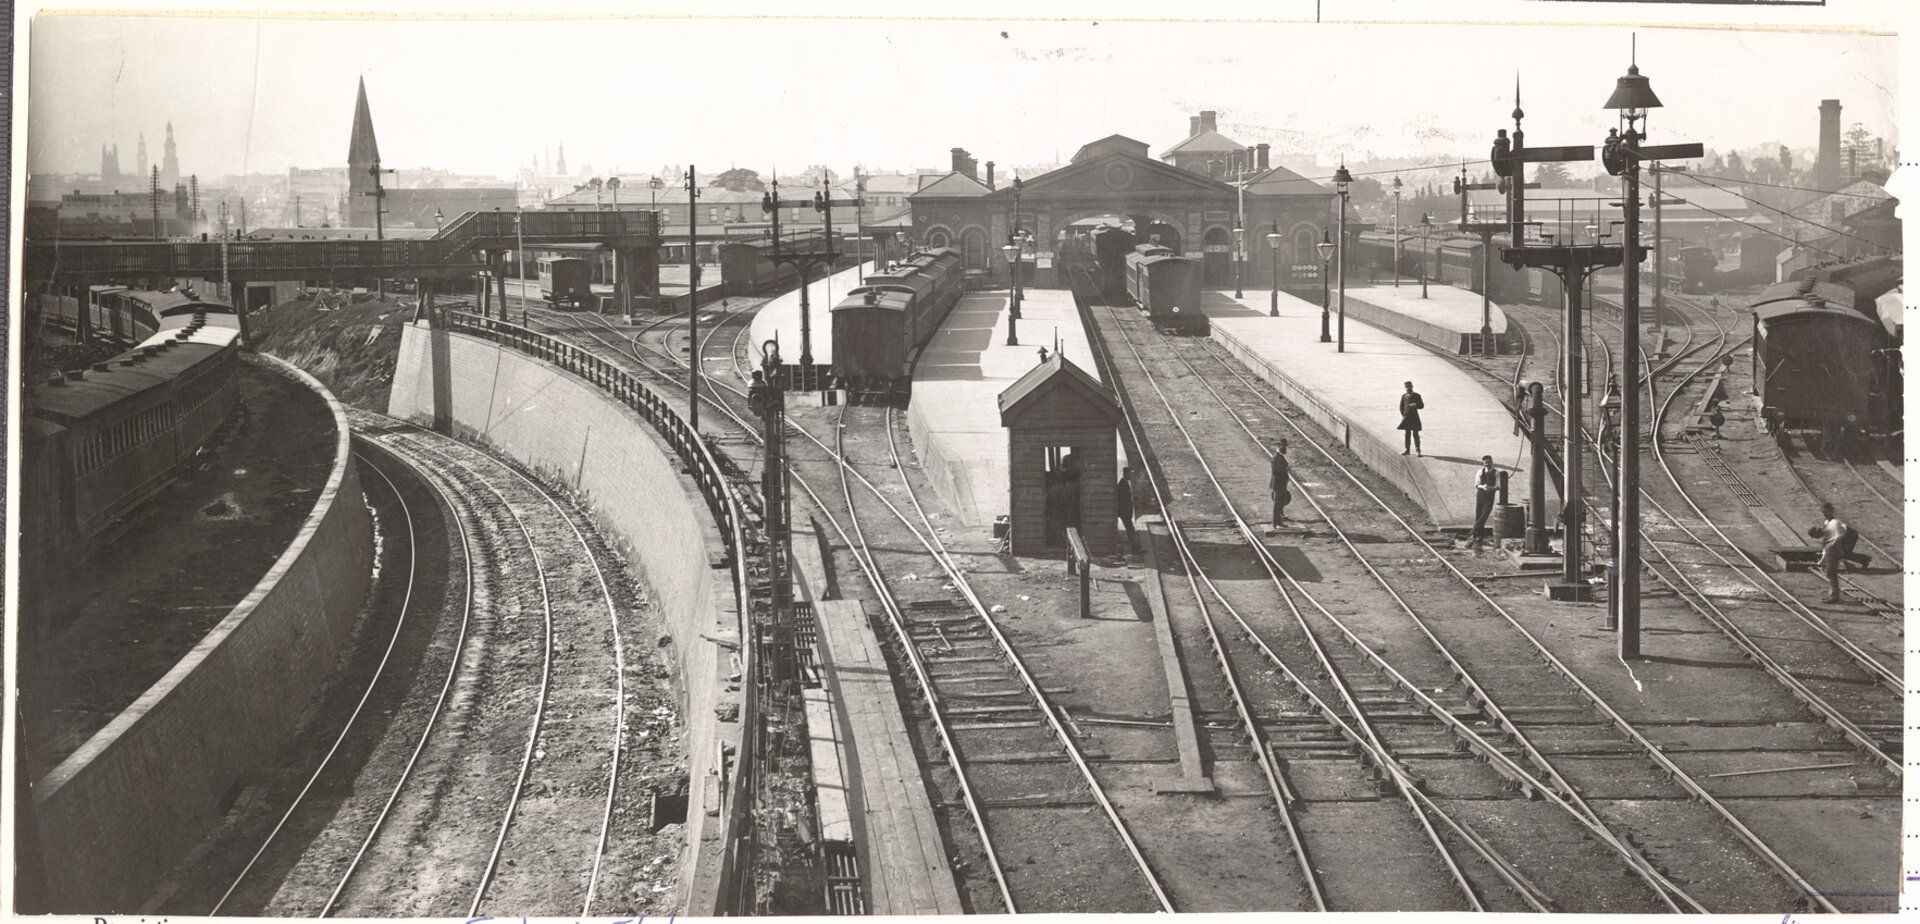 View over the railway tracks looking towards Sydney terminal, 1884